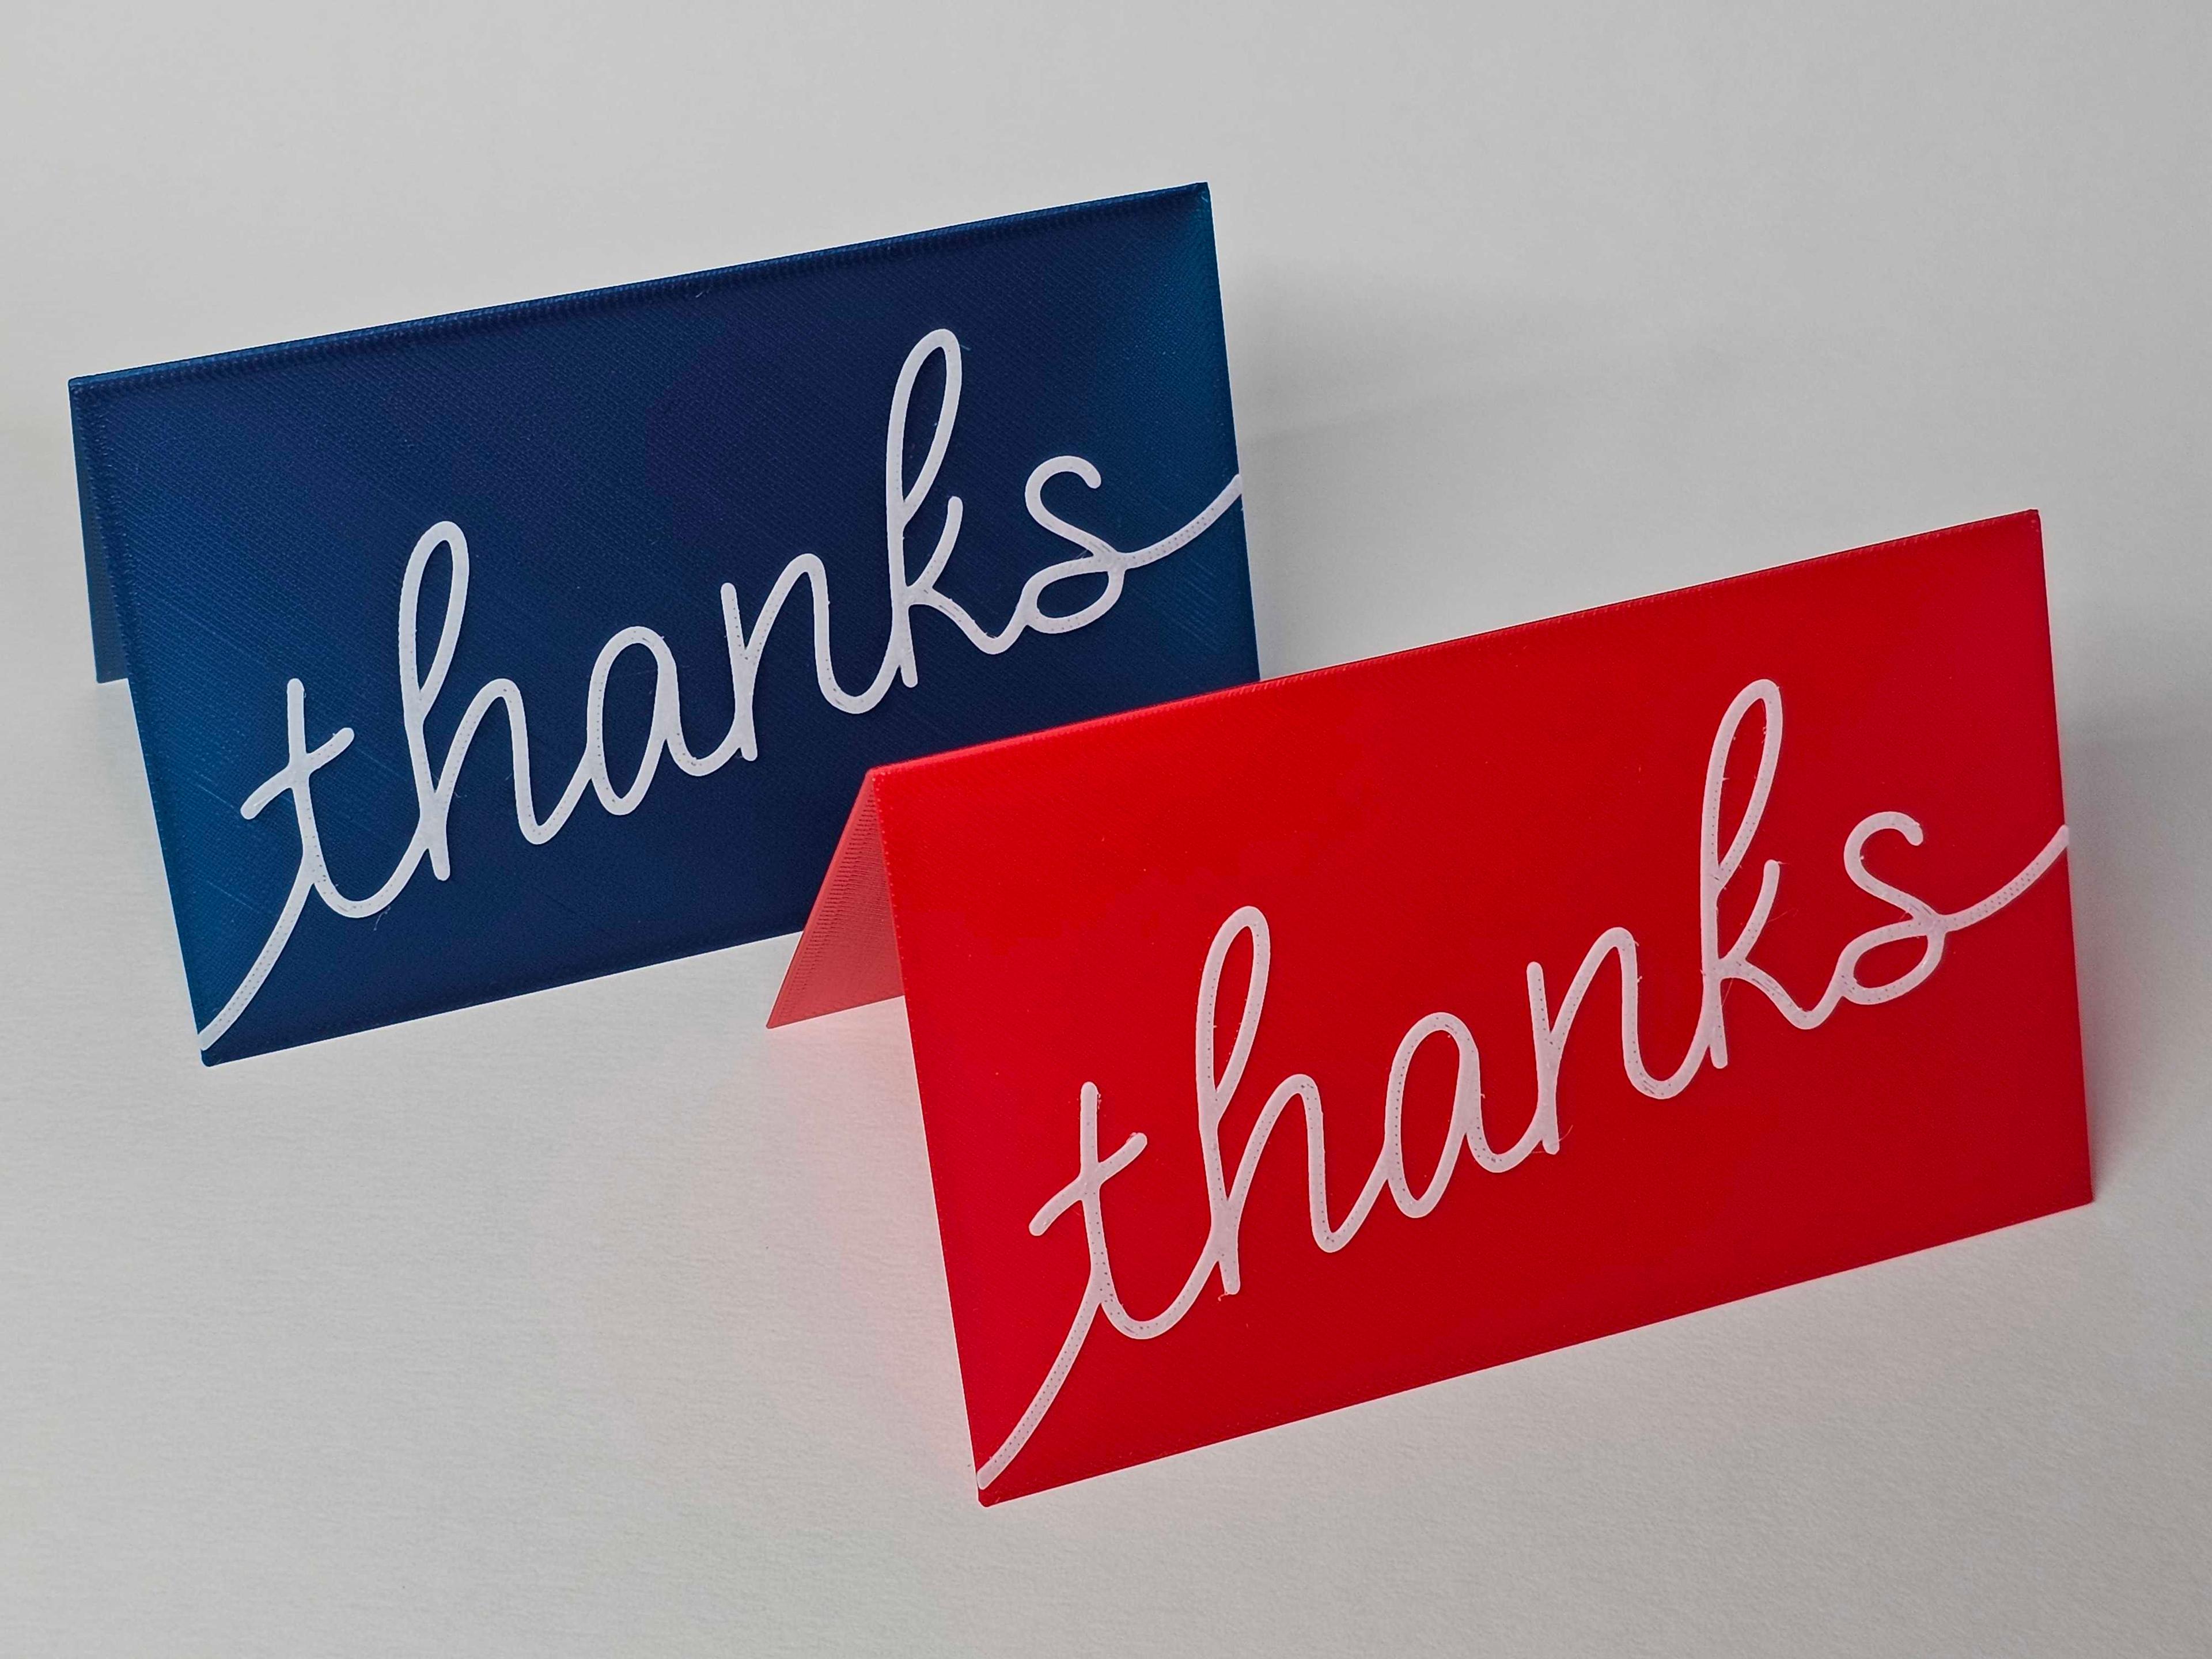 "thanks" Folded Card 3"x5" | Thank You Card | Greeting Card | Tent Sign / Decor 3d model